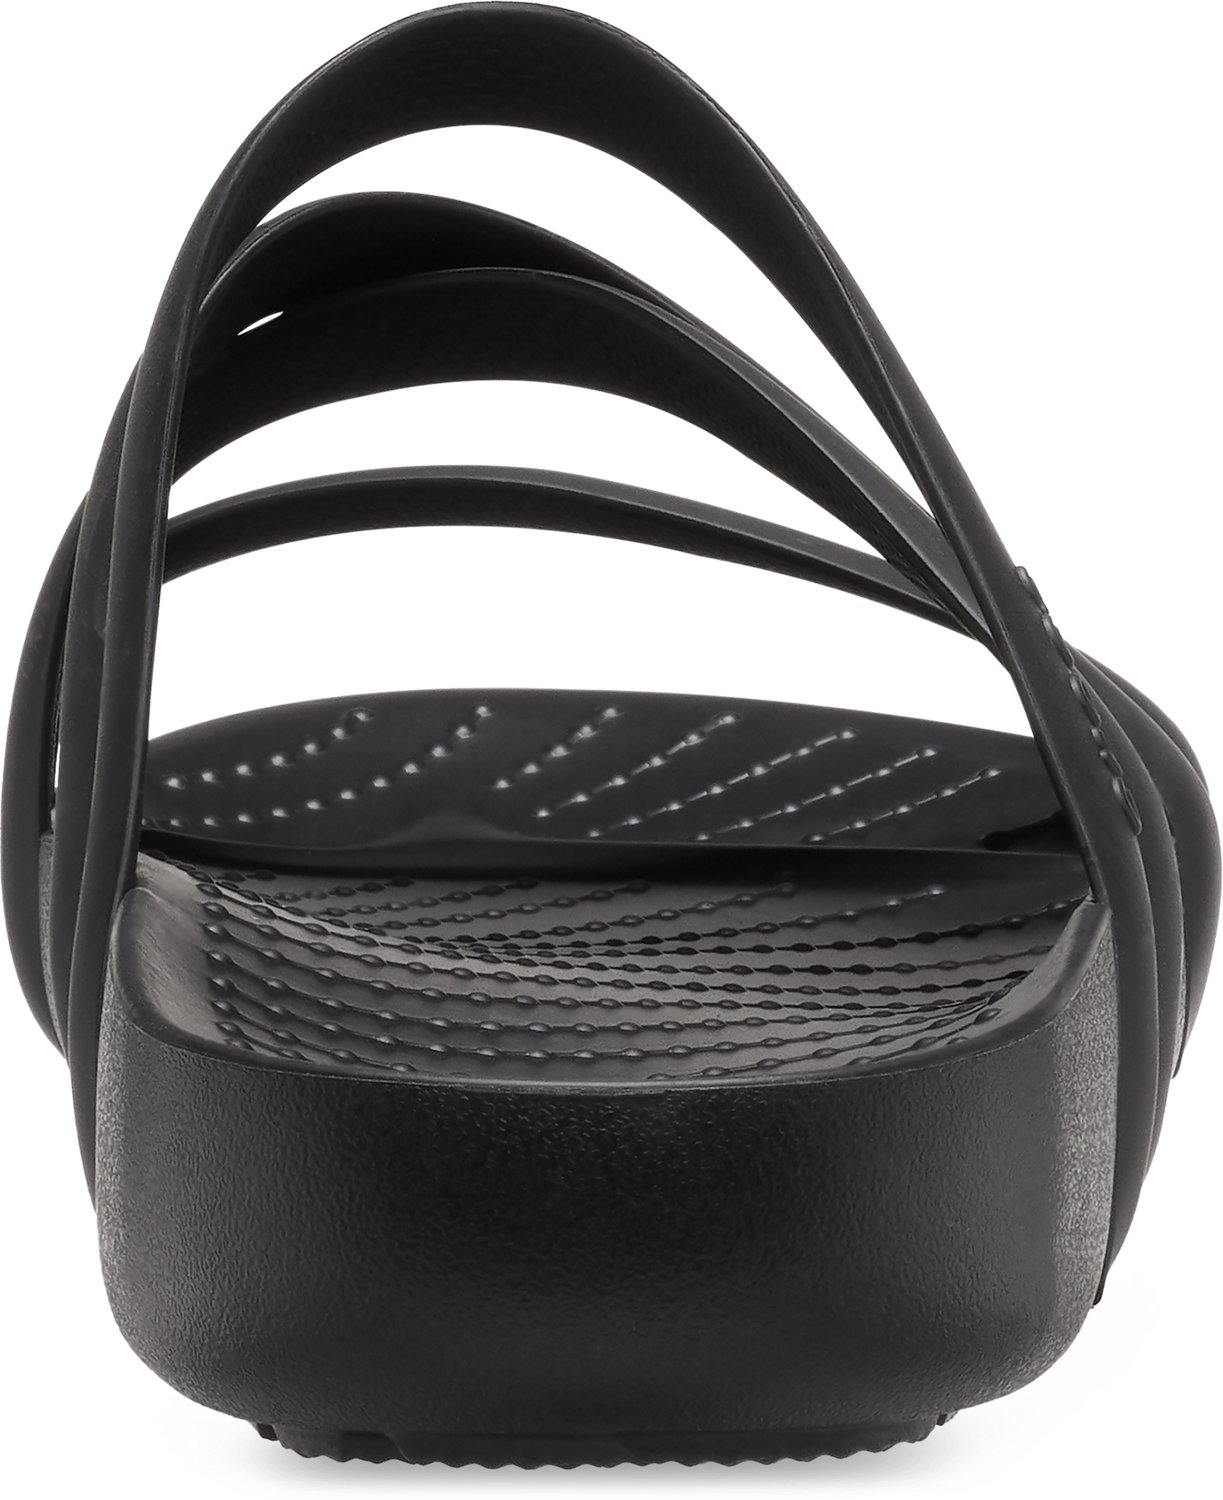 Crocs Women's Splash Strappy Sandals | Free Shipping at Academy